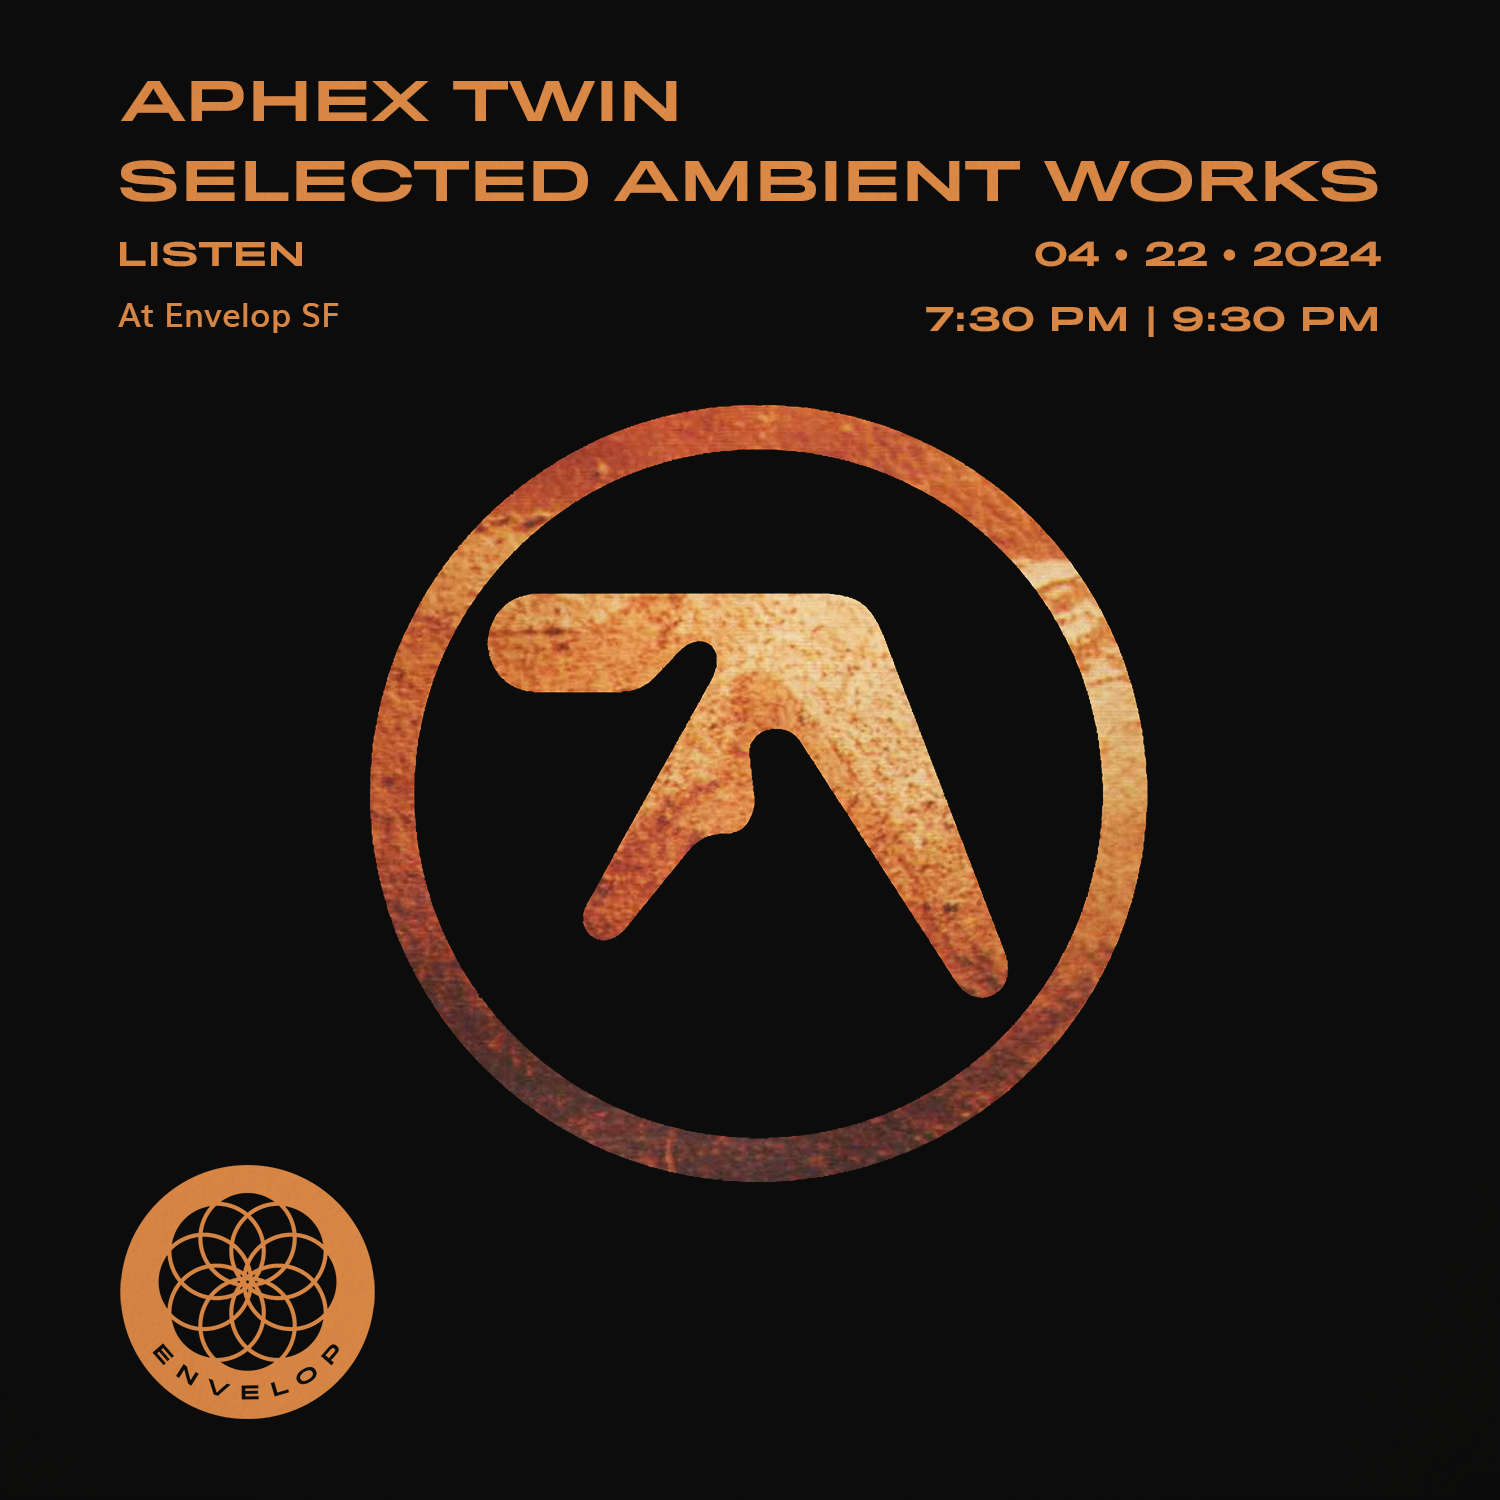 Event image for Aphex Twin - Selected Ambient Works : LISTEN